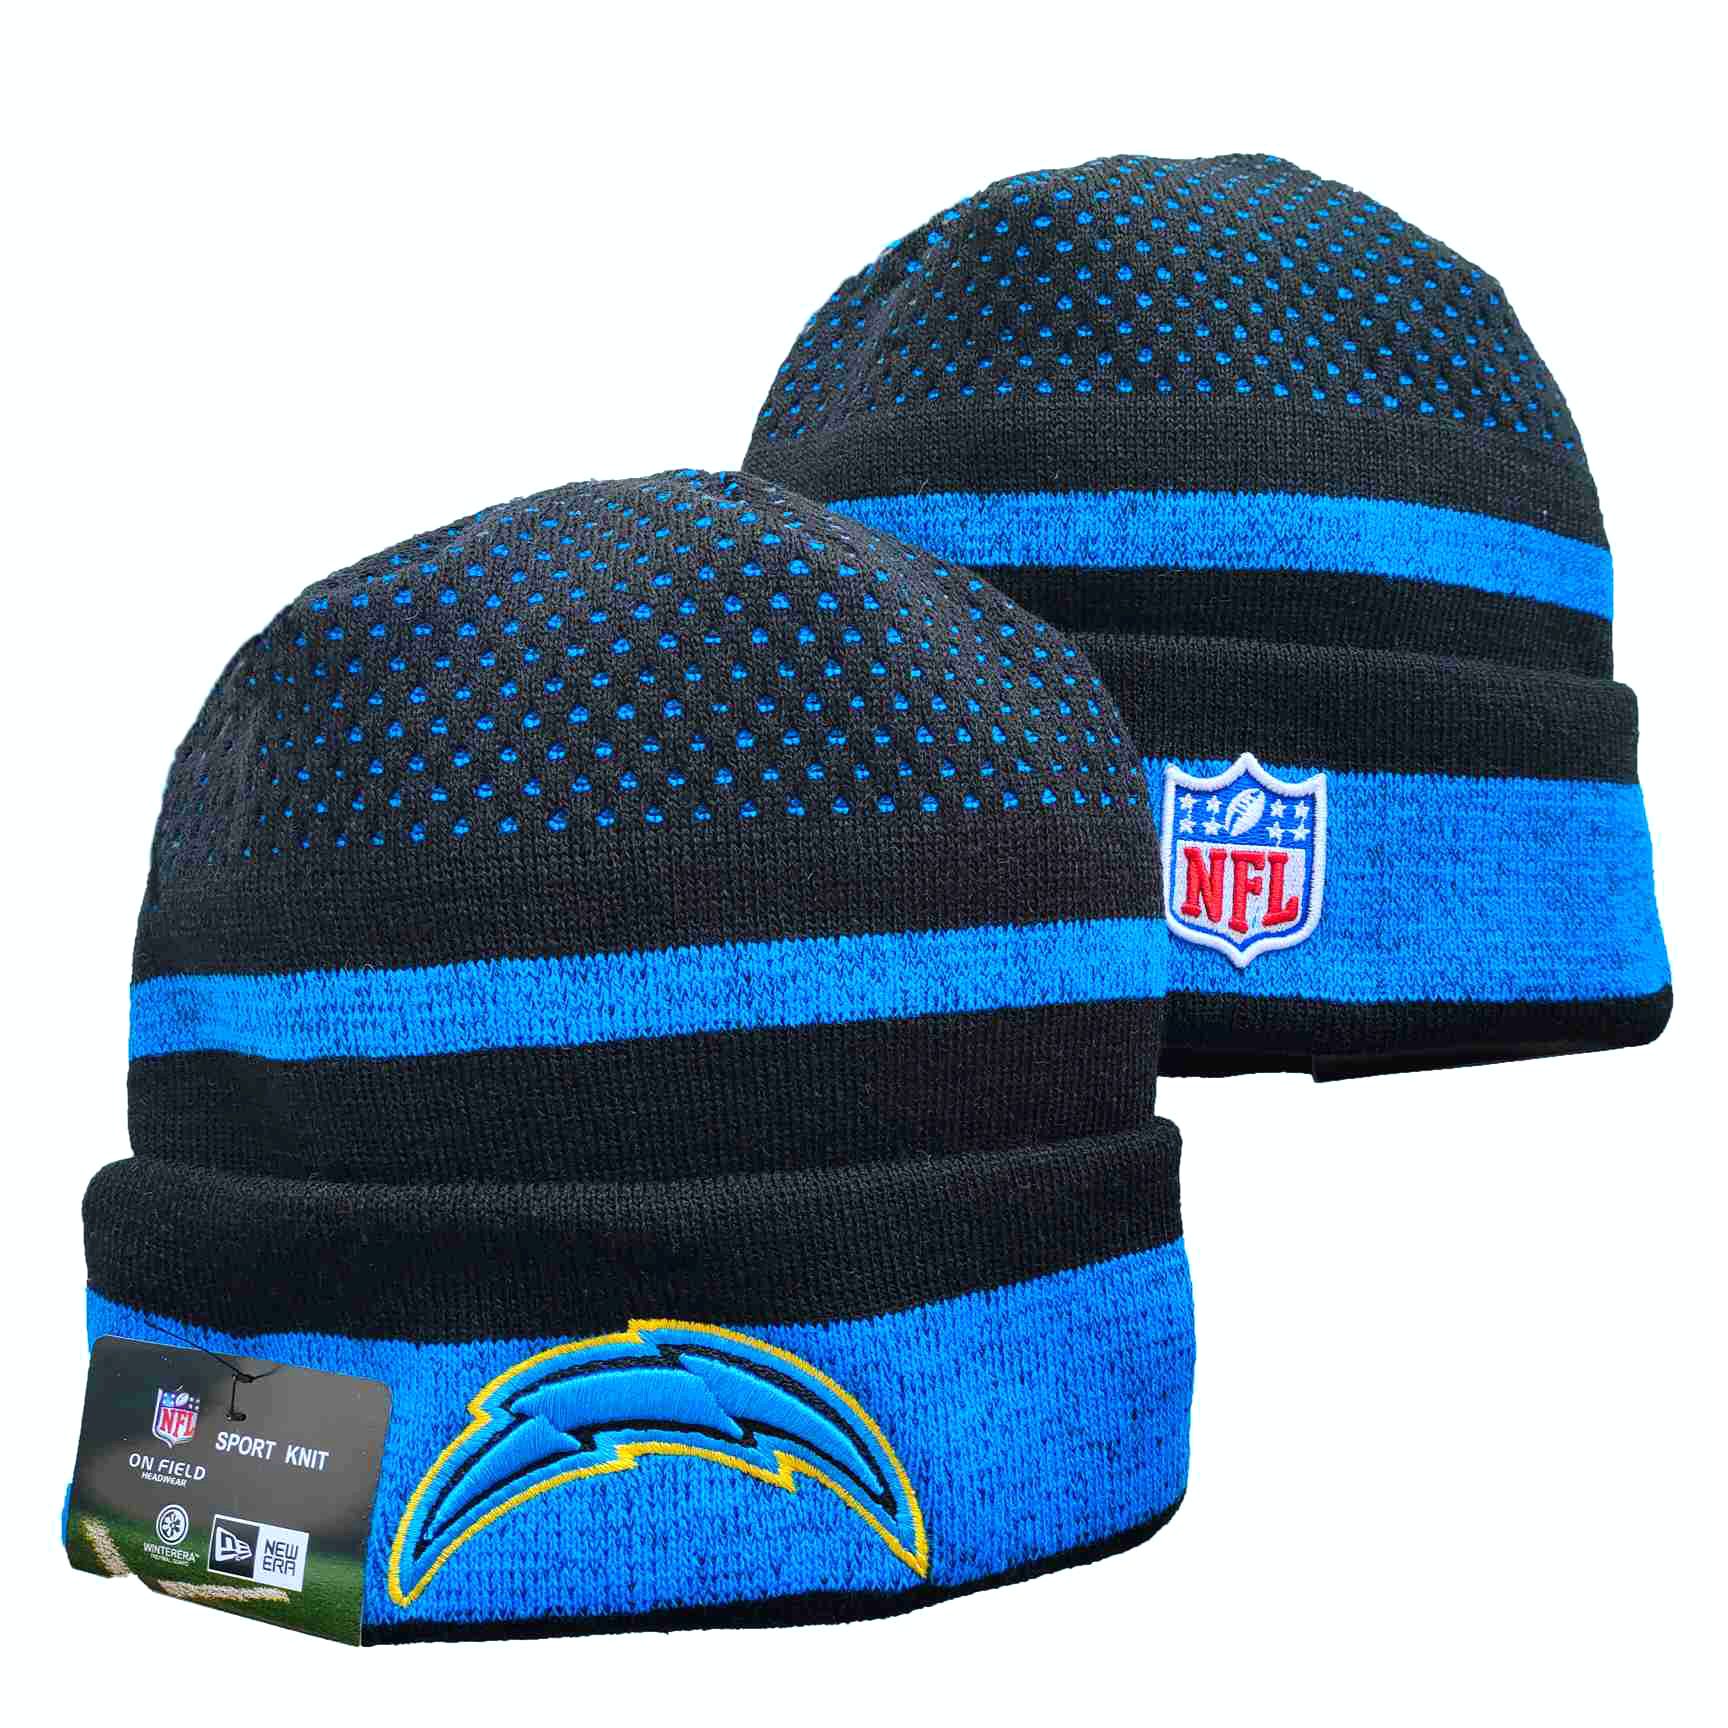 NFL San Diego Chargers Beanies Knit Hats-YD1111